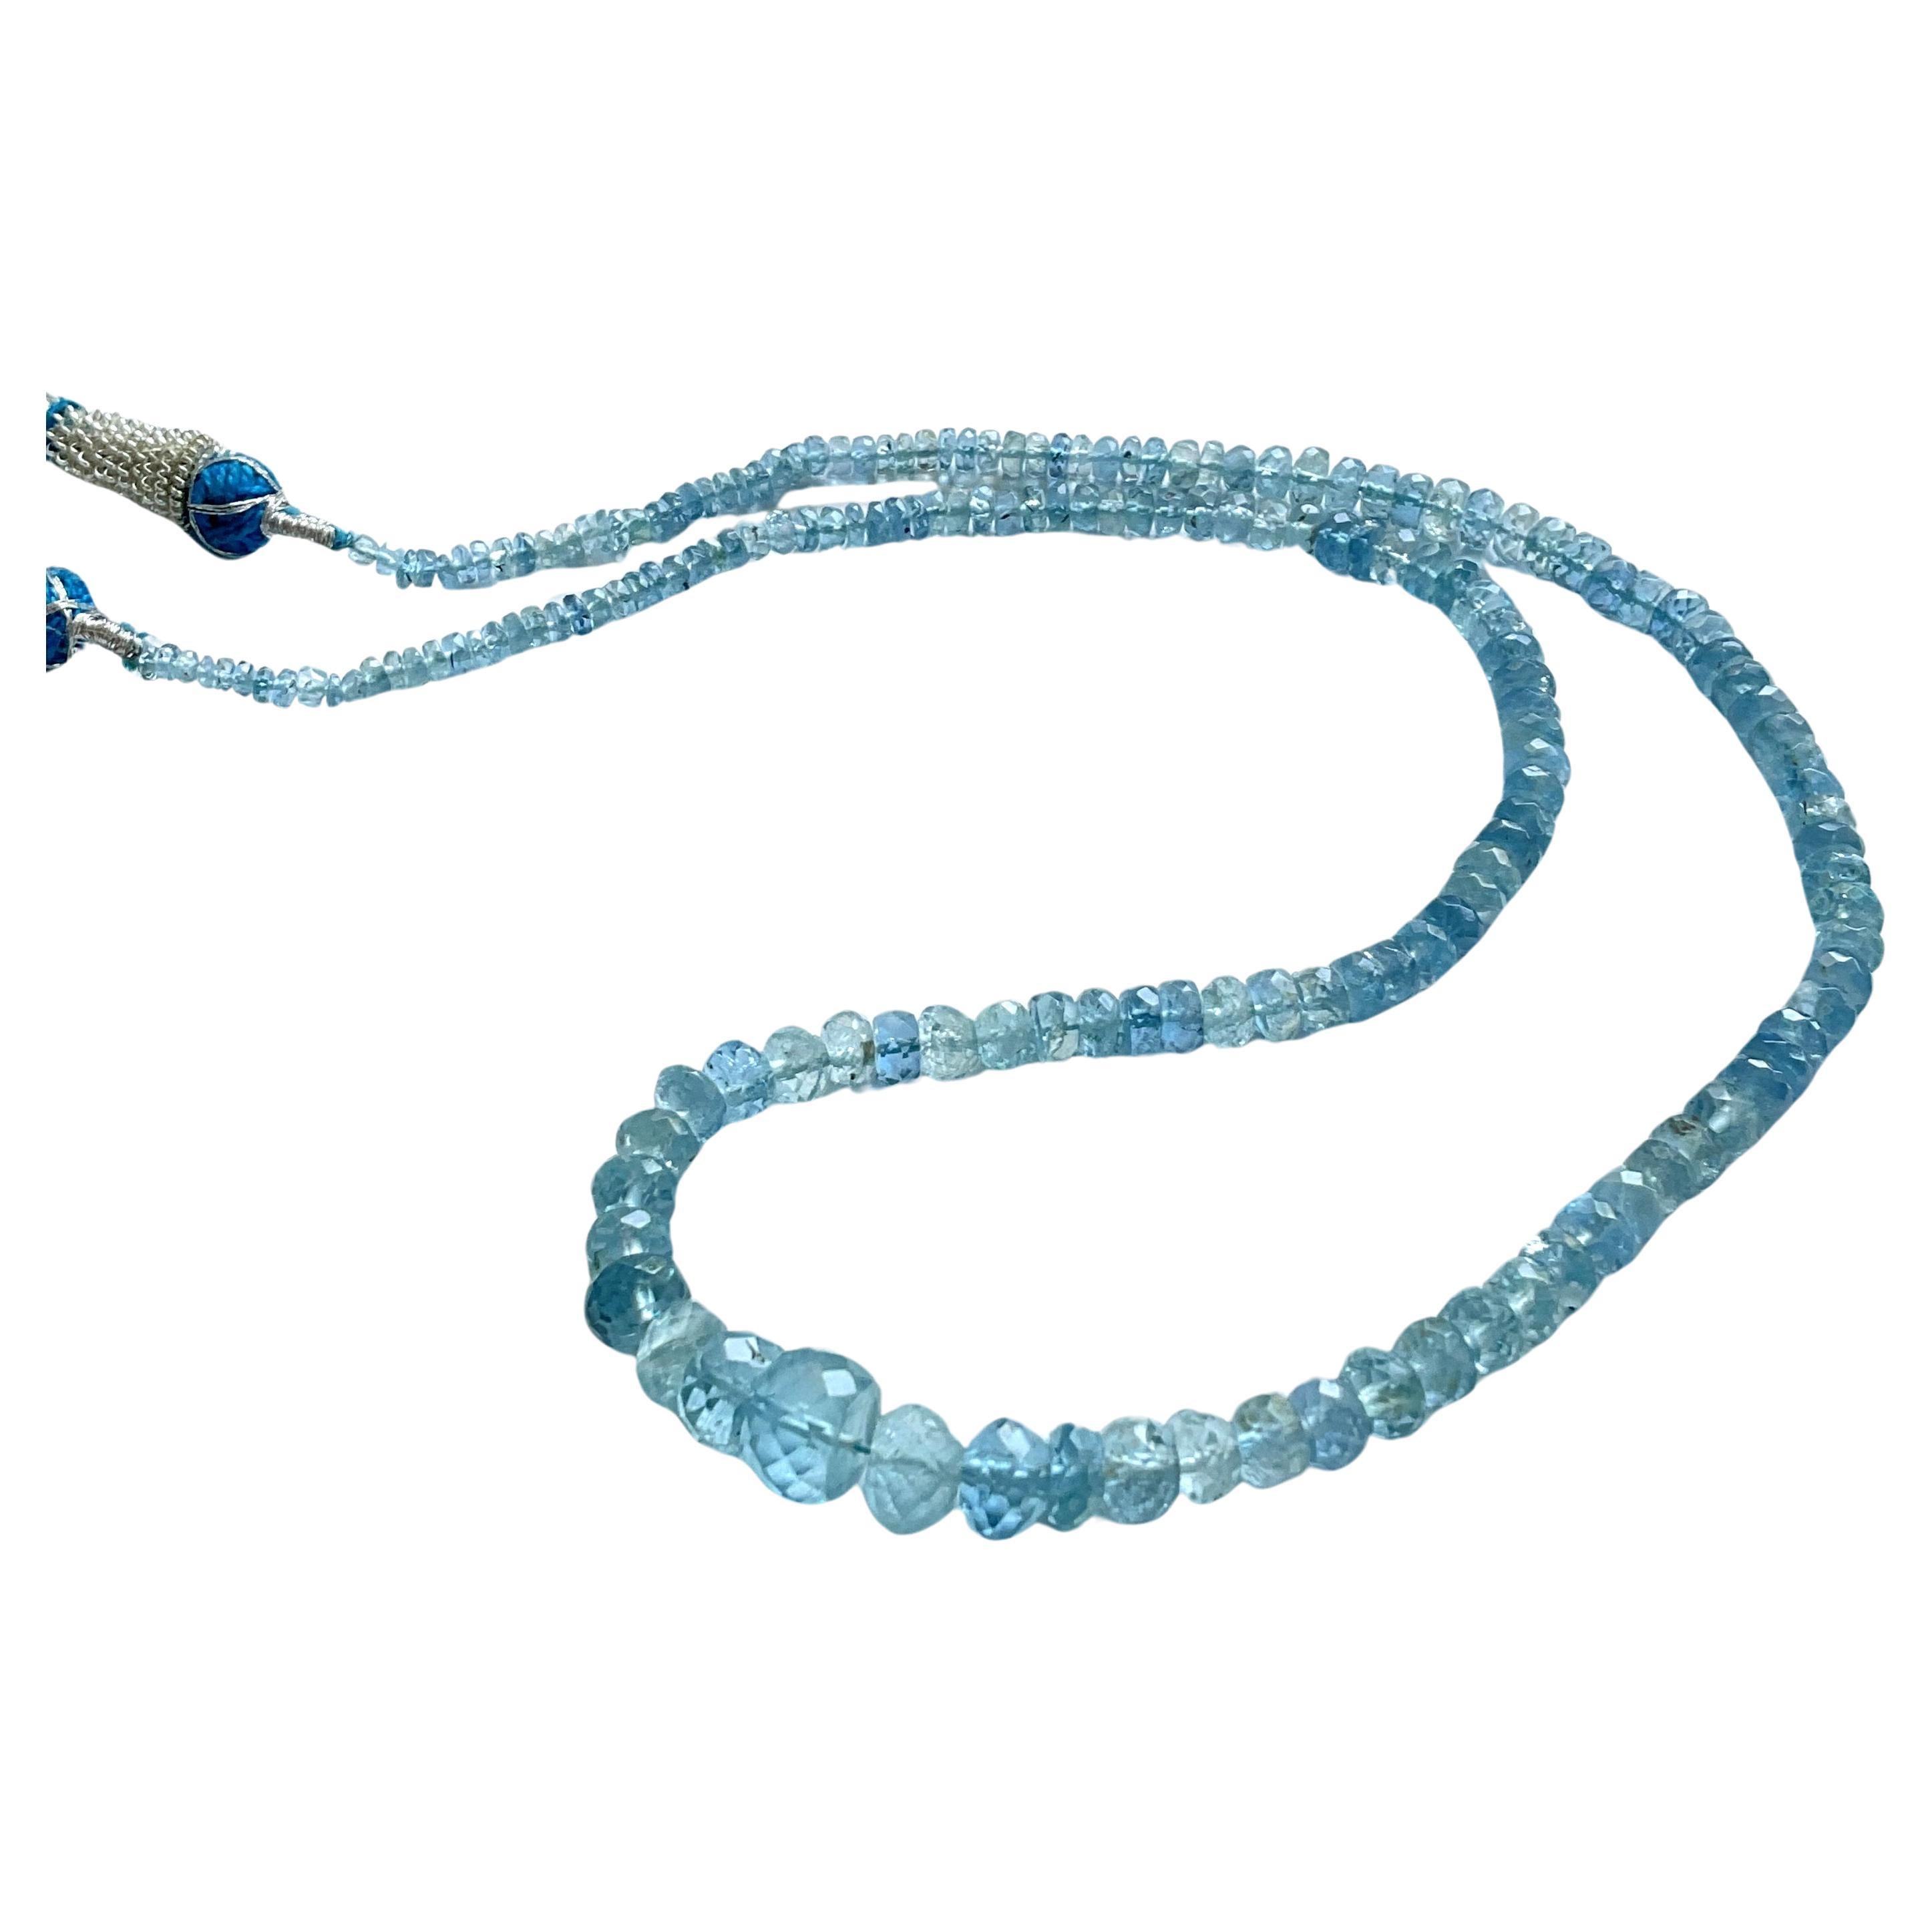 What is aquamarine stone good for?